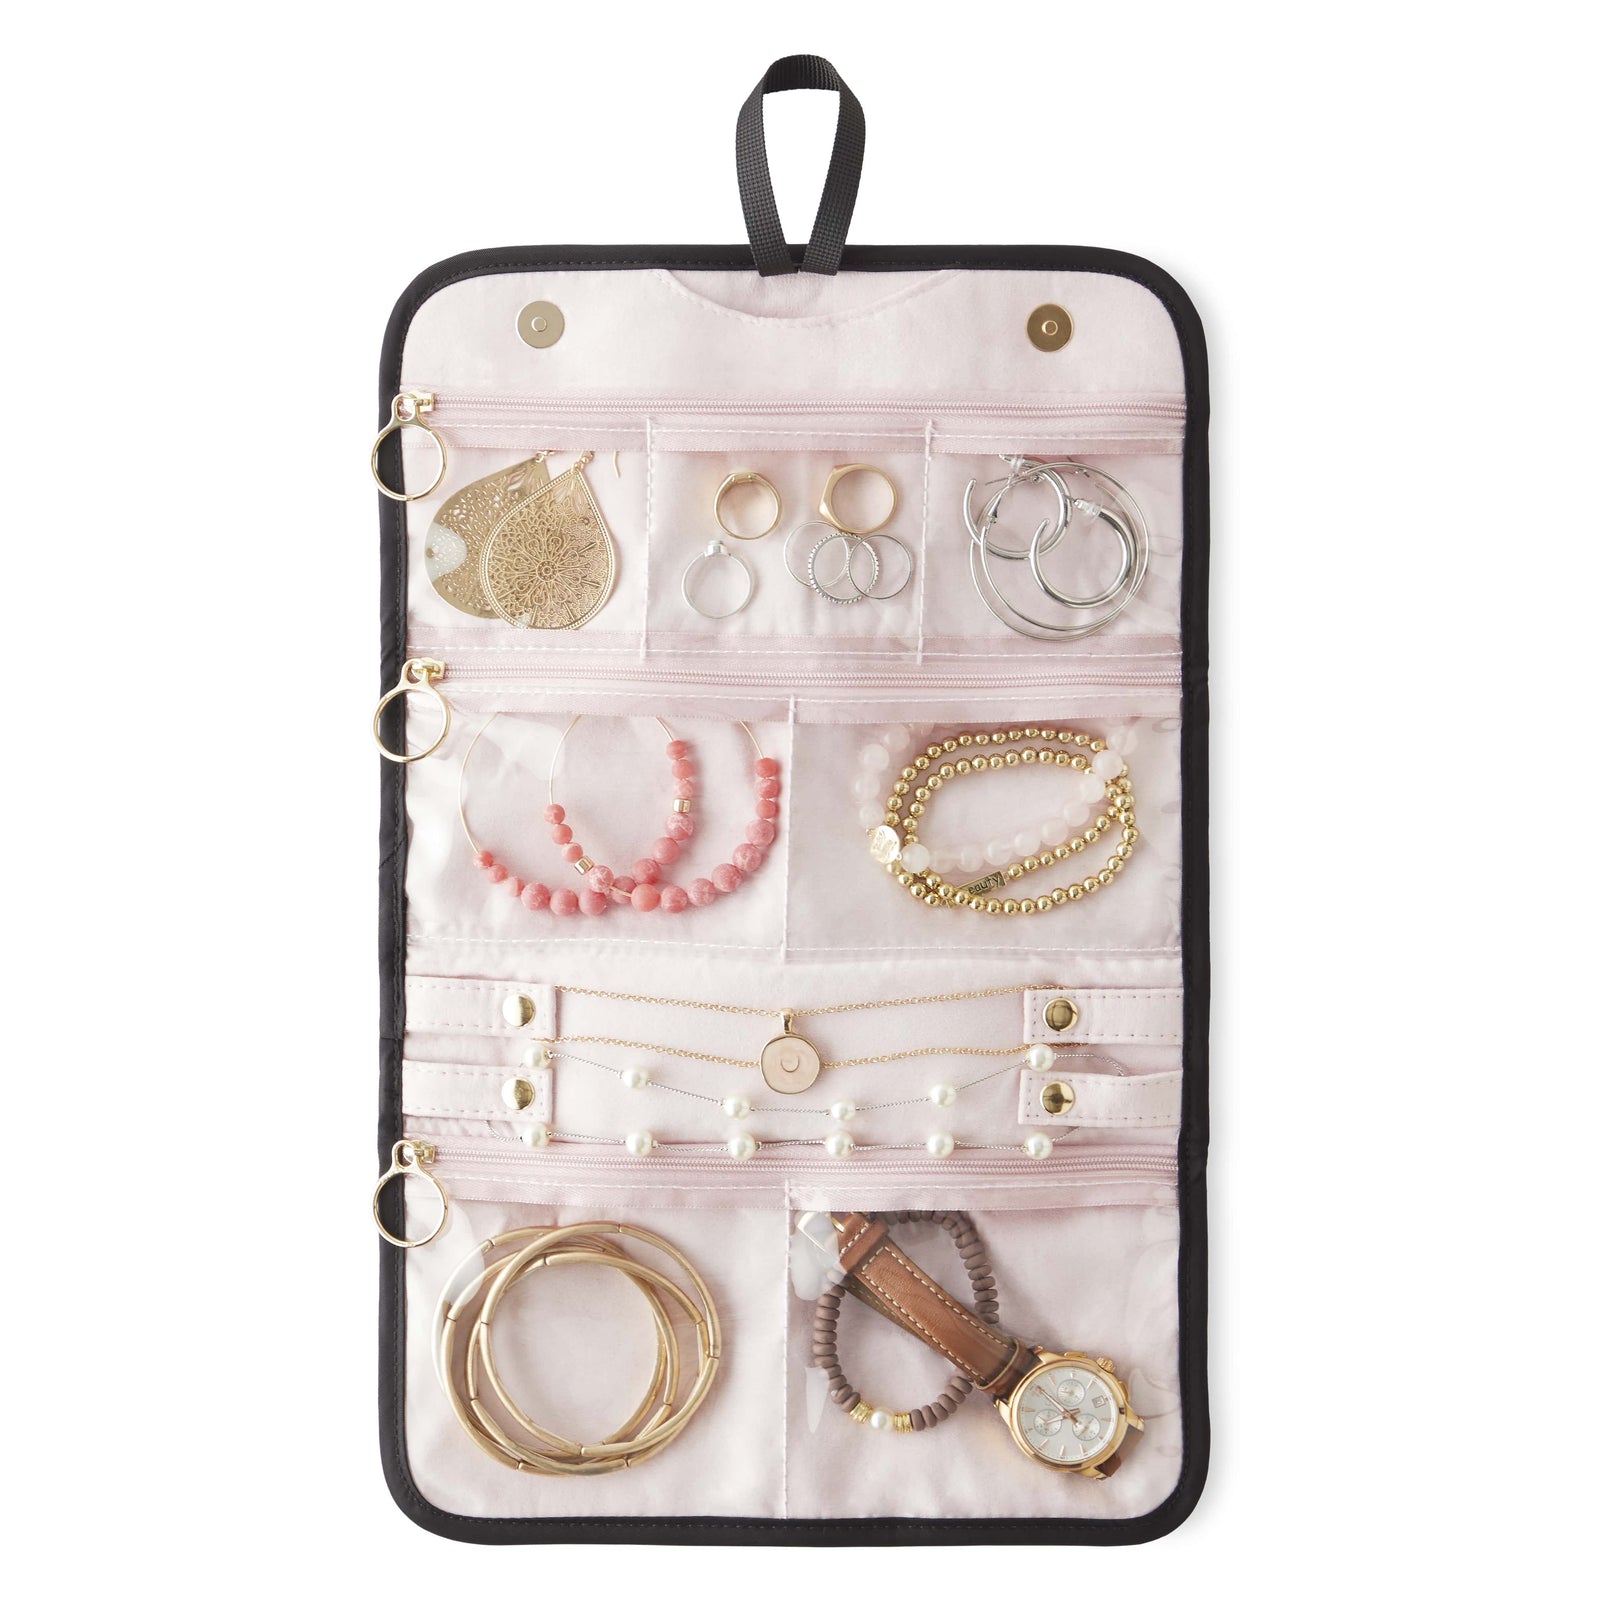 10 Best Travel Jewelry Cases on the Market - Travel by Word